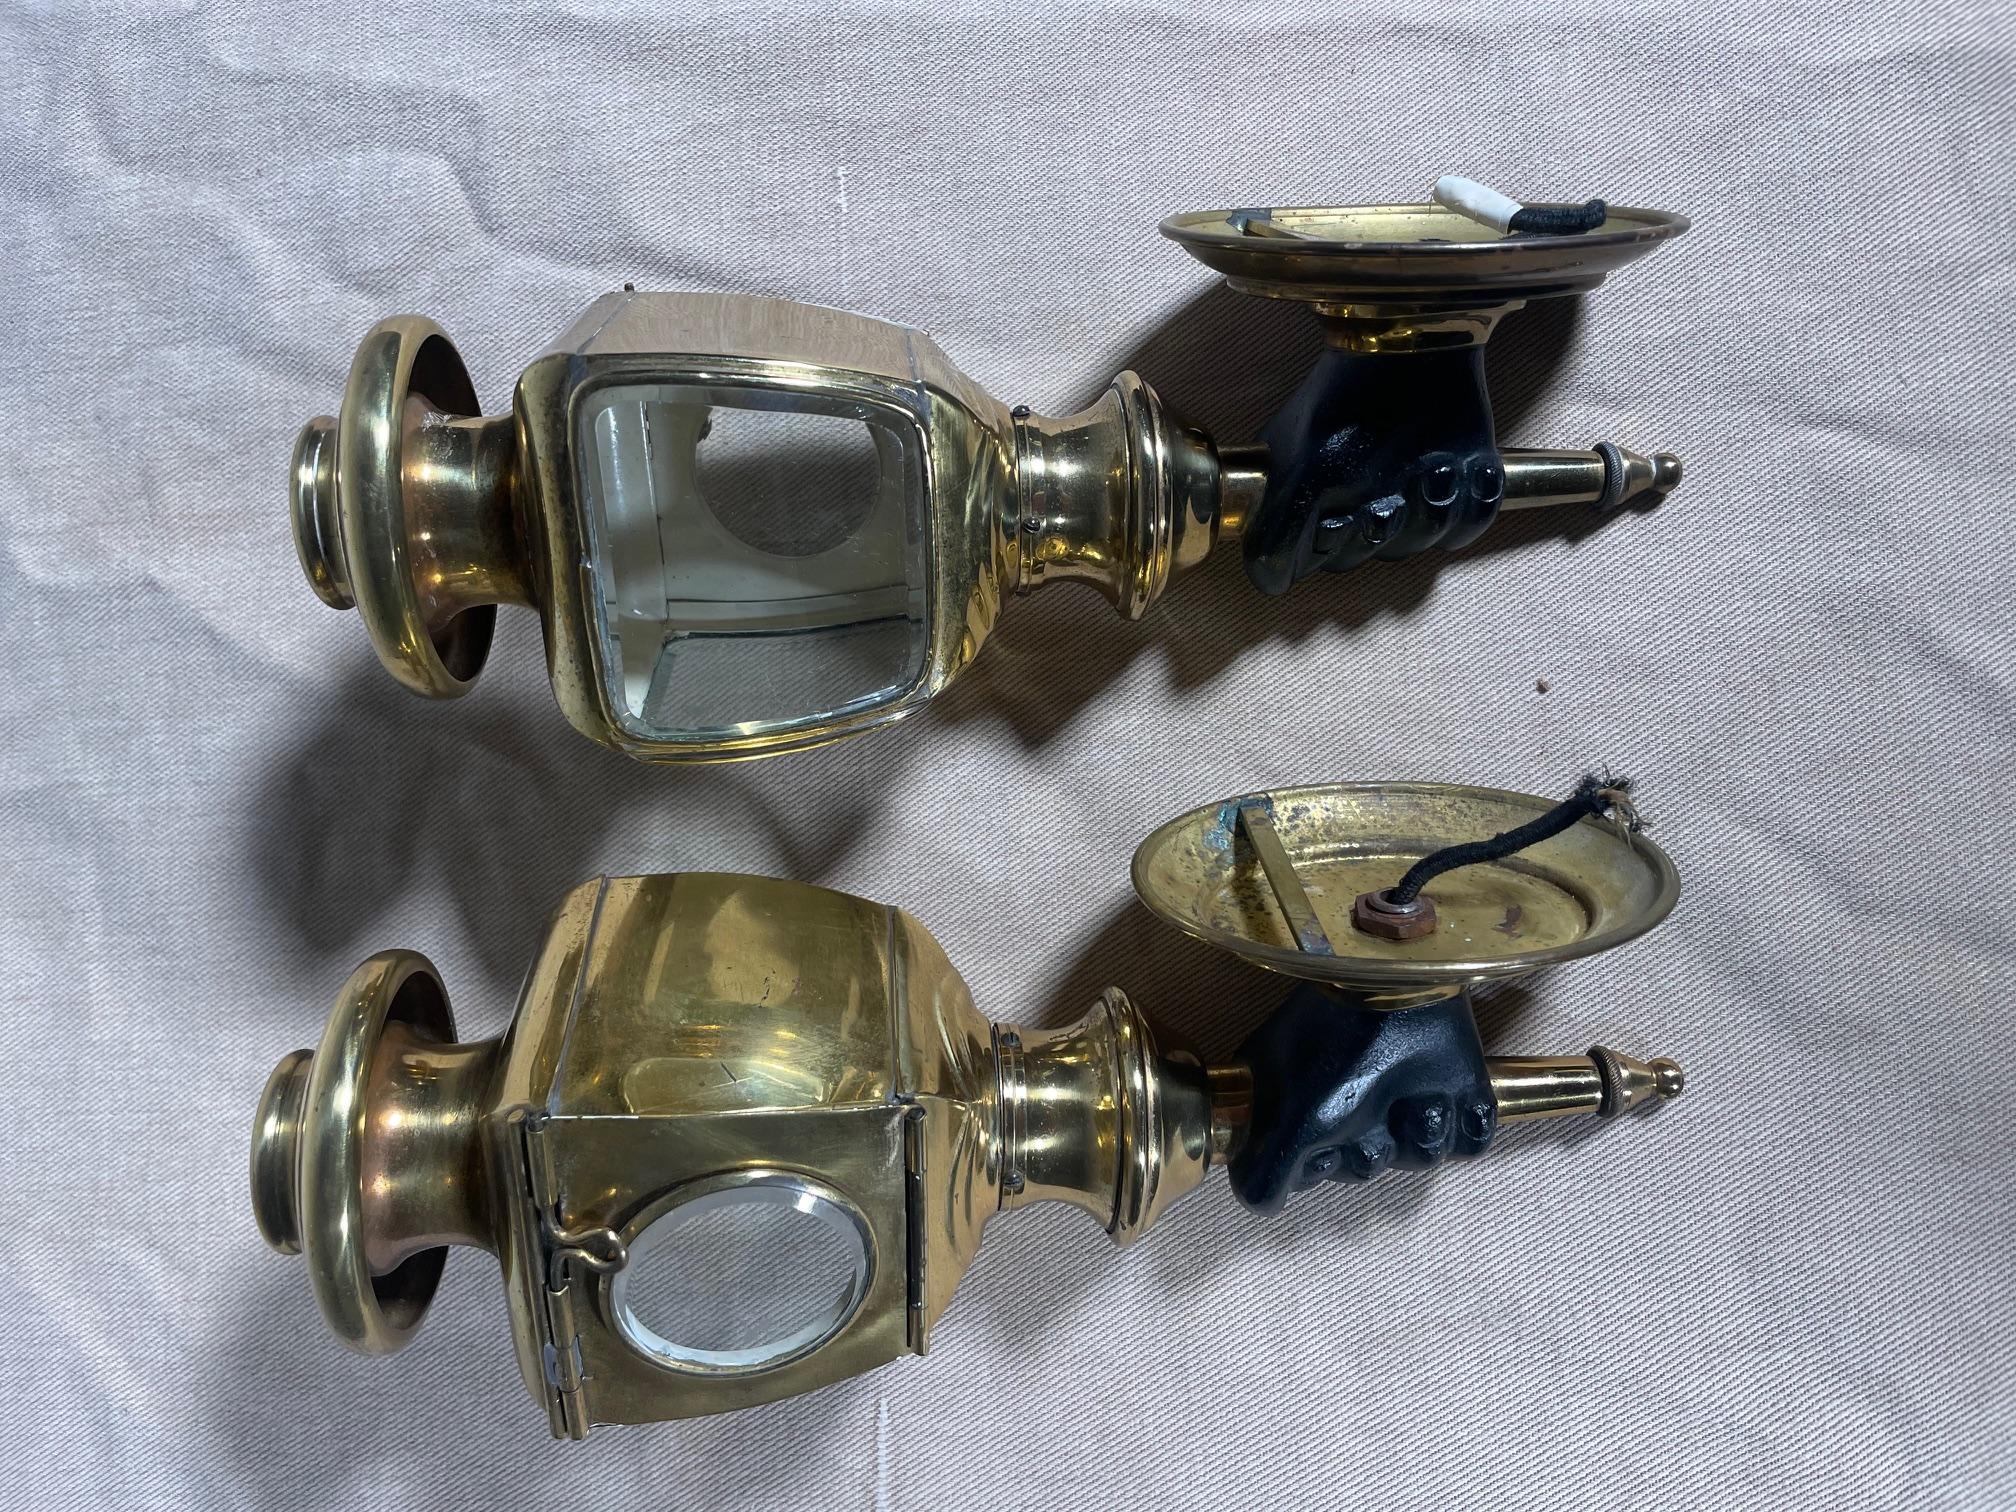 lovely pair of brass sconces in the form of a lantern from the 19th century

Interesting model with a cast iron hand which grips the lantern
Very beautiful little very decorative model

In superb condition and beautiful patina